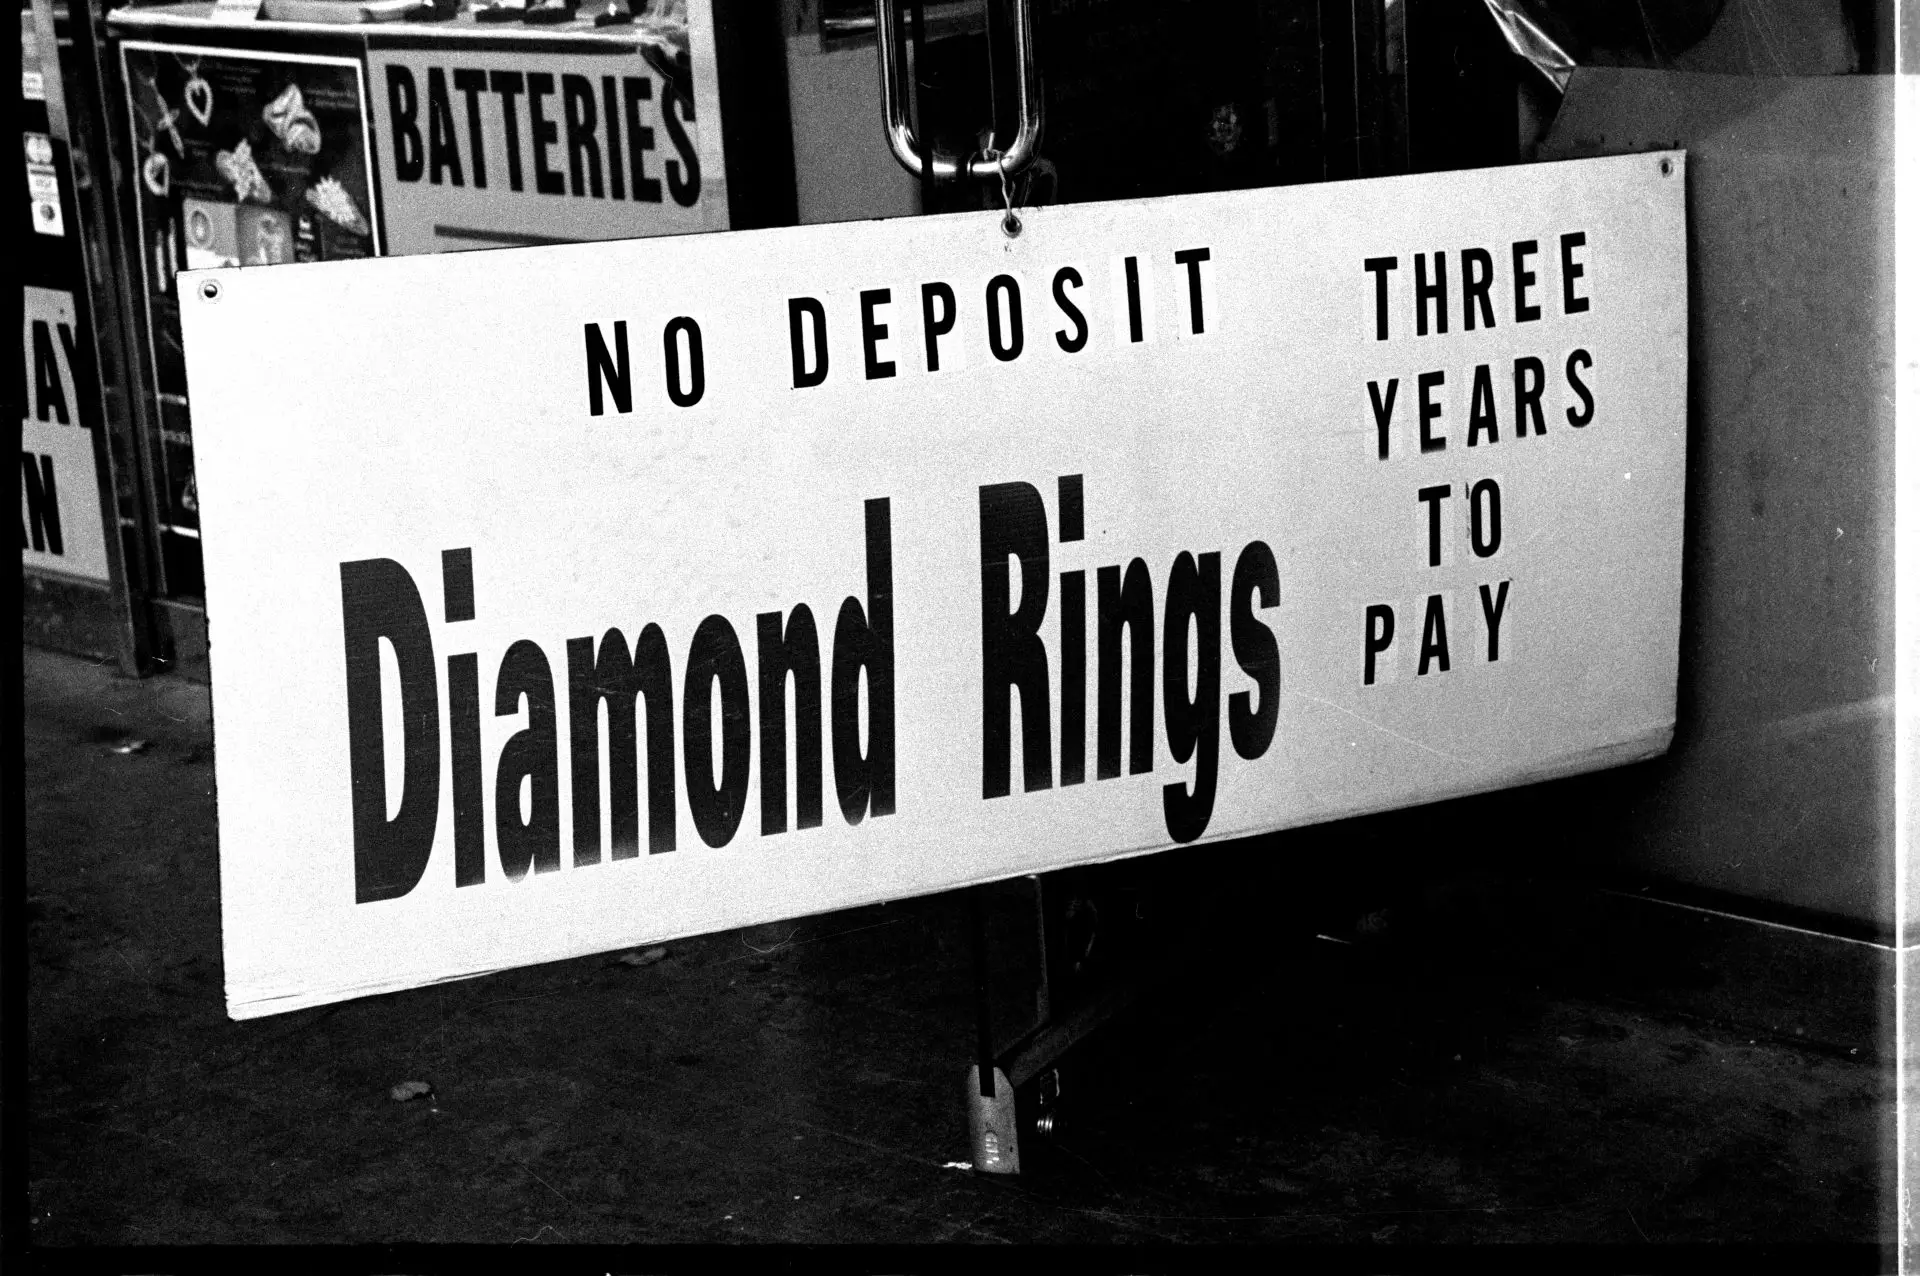 A sign that reads, "DIAMOND RINGS - NO DEPOSIT - THREE YEARS TO PAY" 